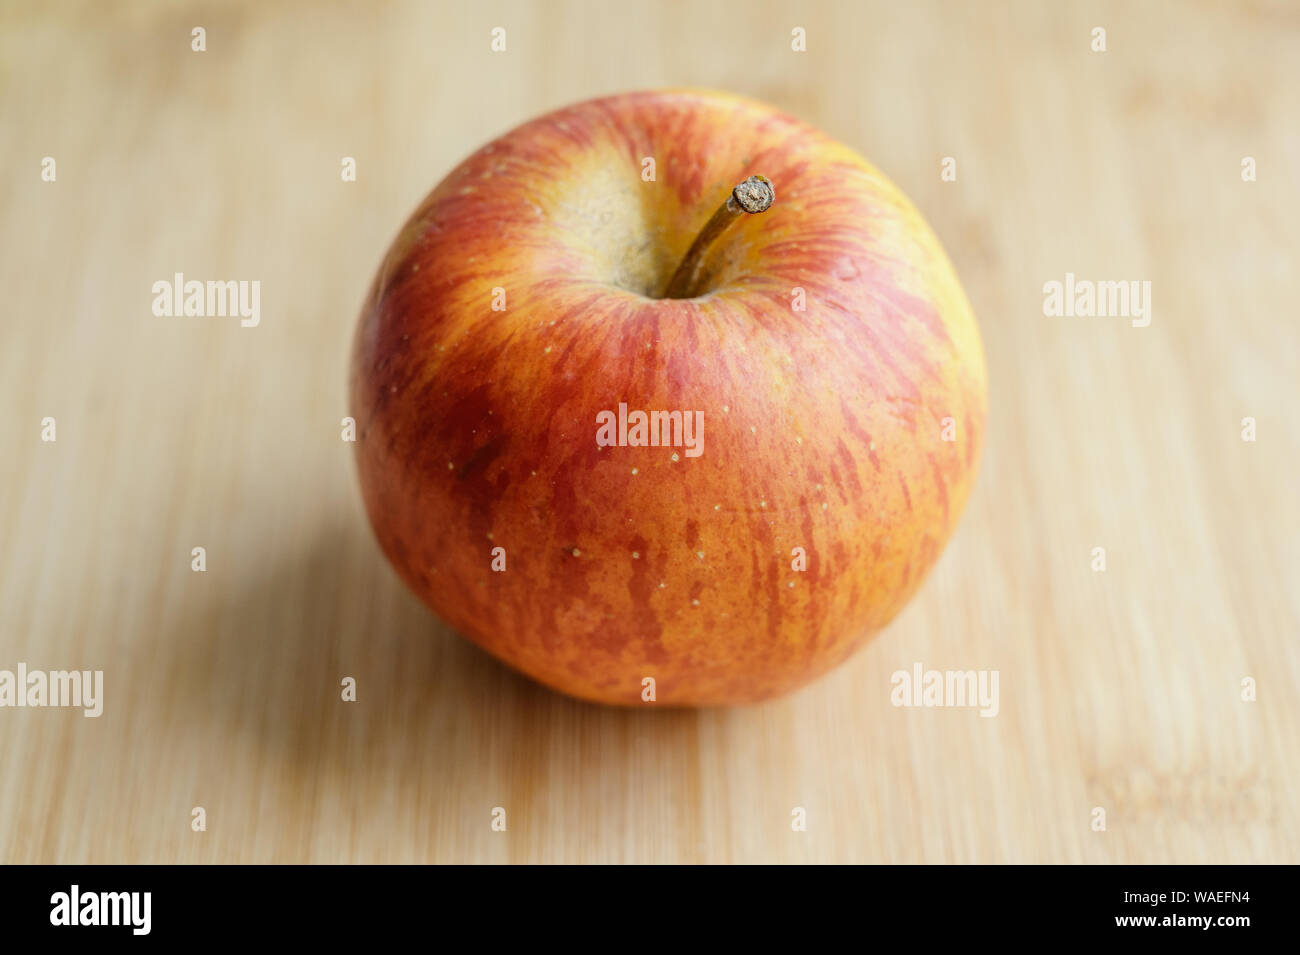 Fresh red apple on wooden table. Selective focus. Stock Photo